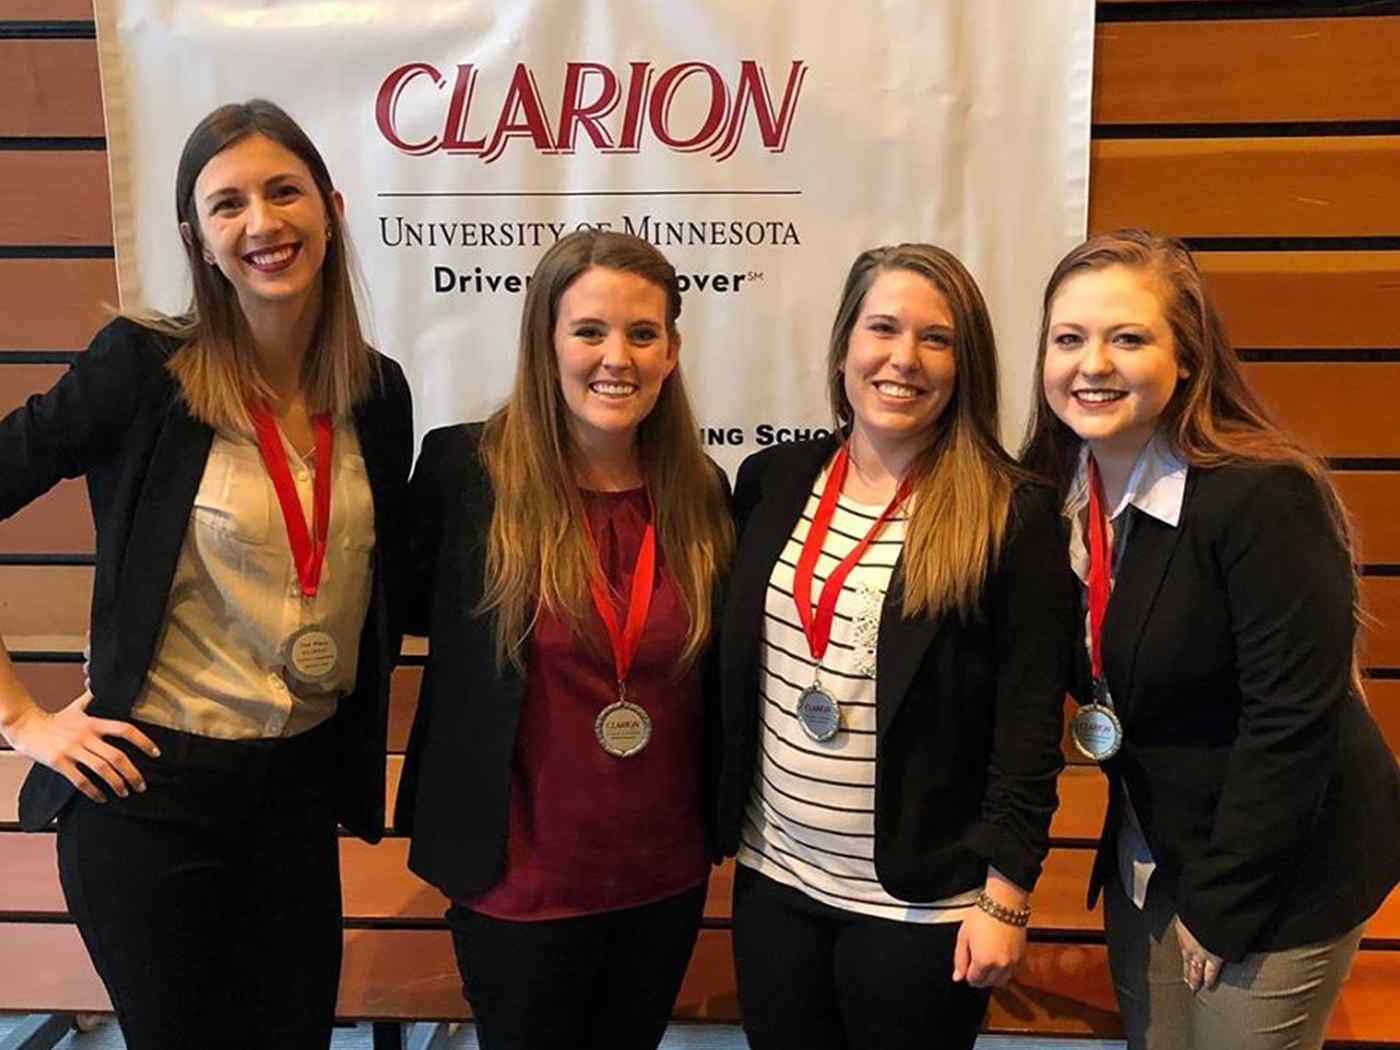 CSD student team that participated in the prestigious CLARION Interprofessional Competition.